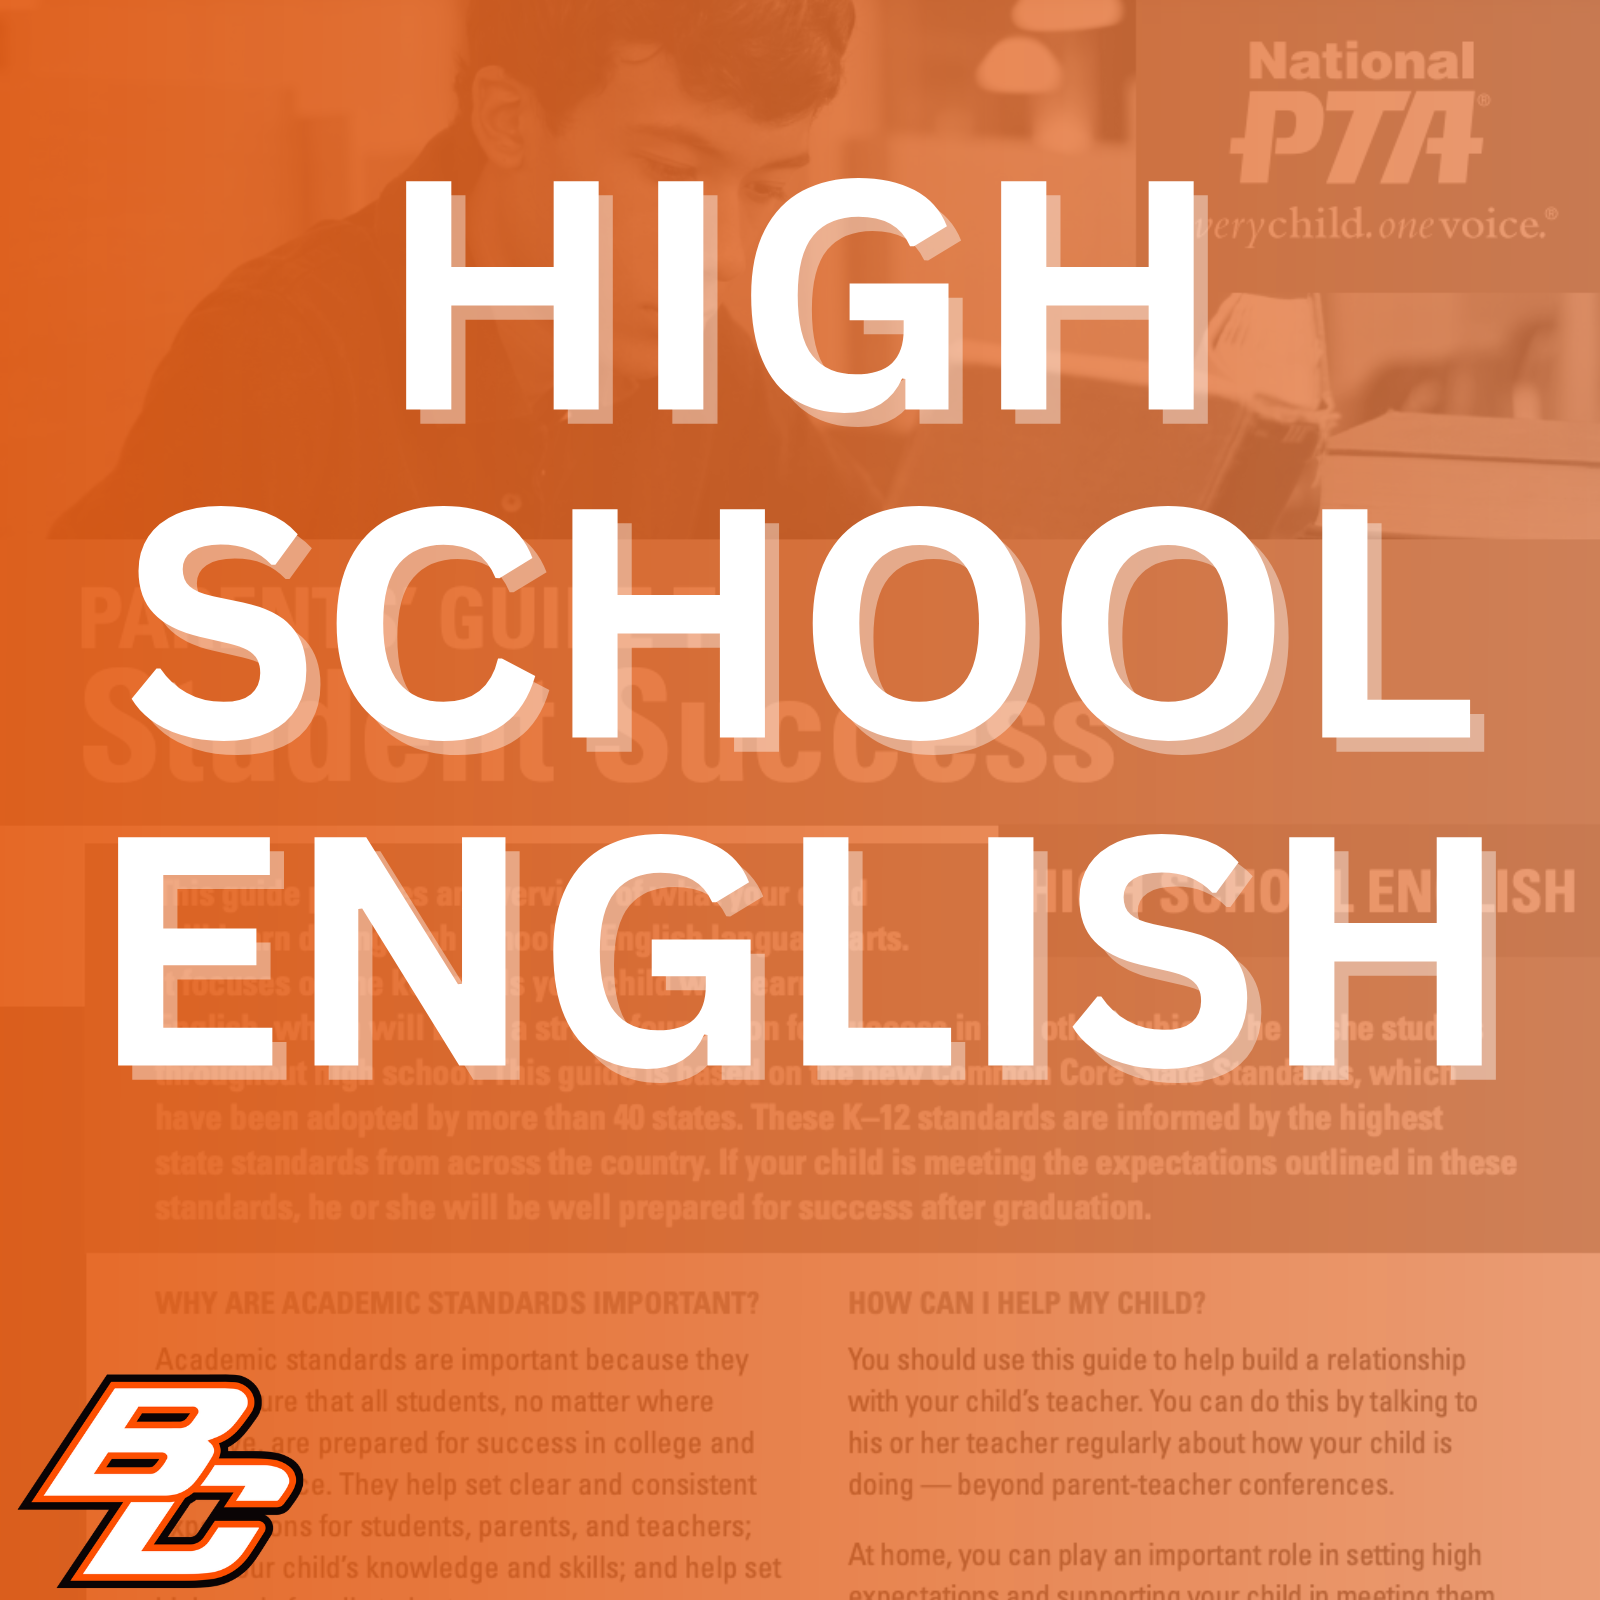 Parent’s Guide to Student Success for High School English: This guide provides an overview of what your child will learn during high school in English language arts. It focuses on the key skills your child will learn in English, which will build a strong foundation for success in the other subjects he or she studies throughout high school. This guide is based on the new Common Core State Standards, which have been adopted by more than 40 states. These K-12 standards are informed by the highest state standards from across the country. If your child is meeting the expectations outlined in these standards, he or she will be well prepared for success after graduation.  Why are academic standards important? Academic standards are important because they help ensure that all students, no matter where they live, are prepared for success in college and the workforce. They help set clear and consistent expectations for students, parents, and teachers; build your child's knowledge and skills; and help set high goals for all students.  Of course, high standards are not the only thing needed for our children's success. But standards provide an important first step - a clear roadmap for learning for teachers, parents, and students. Having clearly defined goals helps families and teachers work together to ensure that students succeed. Standards help parents and teachers know when students need extra assistance or when they need to be challenged even more. They also will help your child develop critical thinking skills that will prepare him or her for college and career.  How can I help my child? You should use this guide to help build a relationship with your child's teacher. You can do this by talking to his or her teacher regularly about how your child is doing - beyond parent-teacher conferences.  At home, you can play an important role in setting high expectations and supporting your child in meeting them. If your child needs a little extra help or wants to learn more about a subject, work with his or her teacher to identify opportunities for tutoring, to get involved in clubs after school, or to find other resources.  This guide includes: An overview of some of the key things your child will learn in English language arts in high school, topics of discussion for talking to your child's teacher about his or her academic progress and tips to help your child plan for college and career.